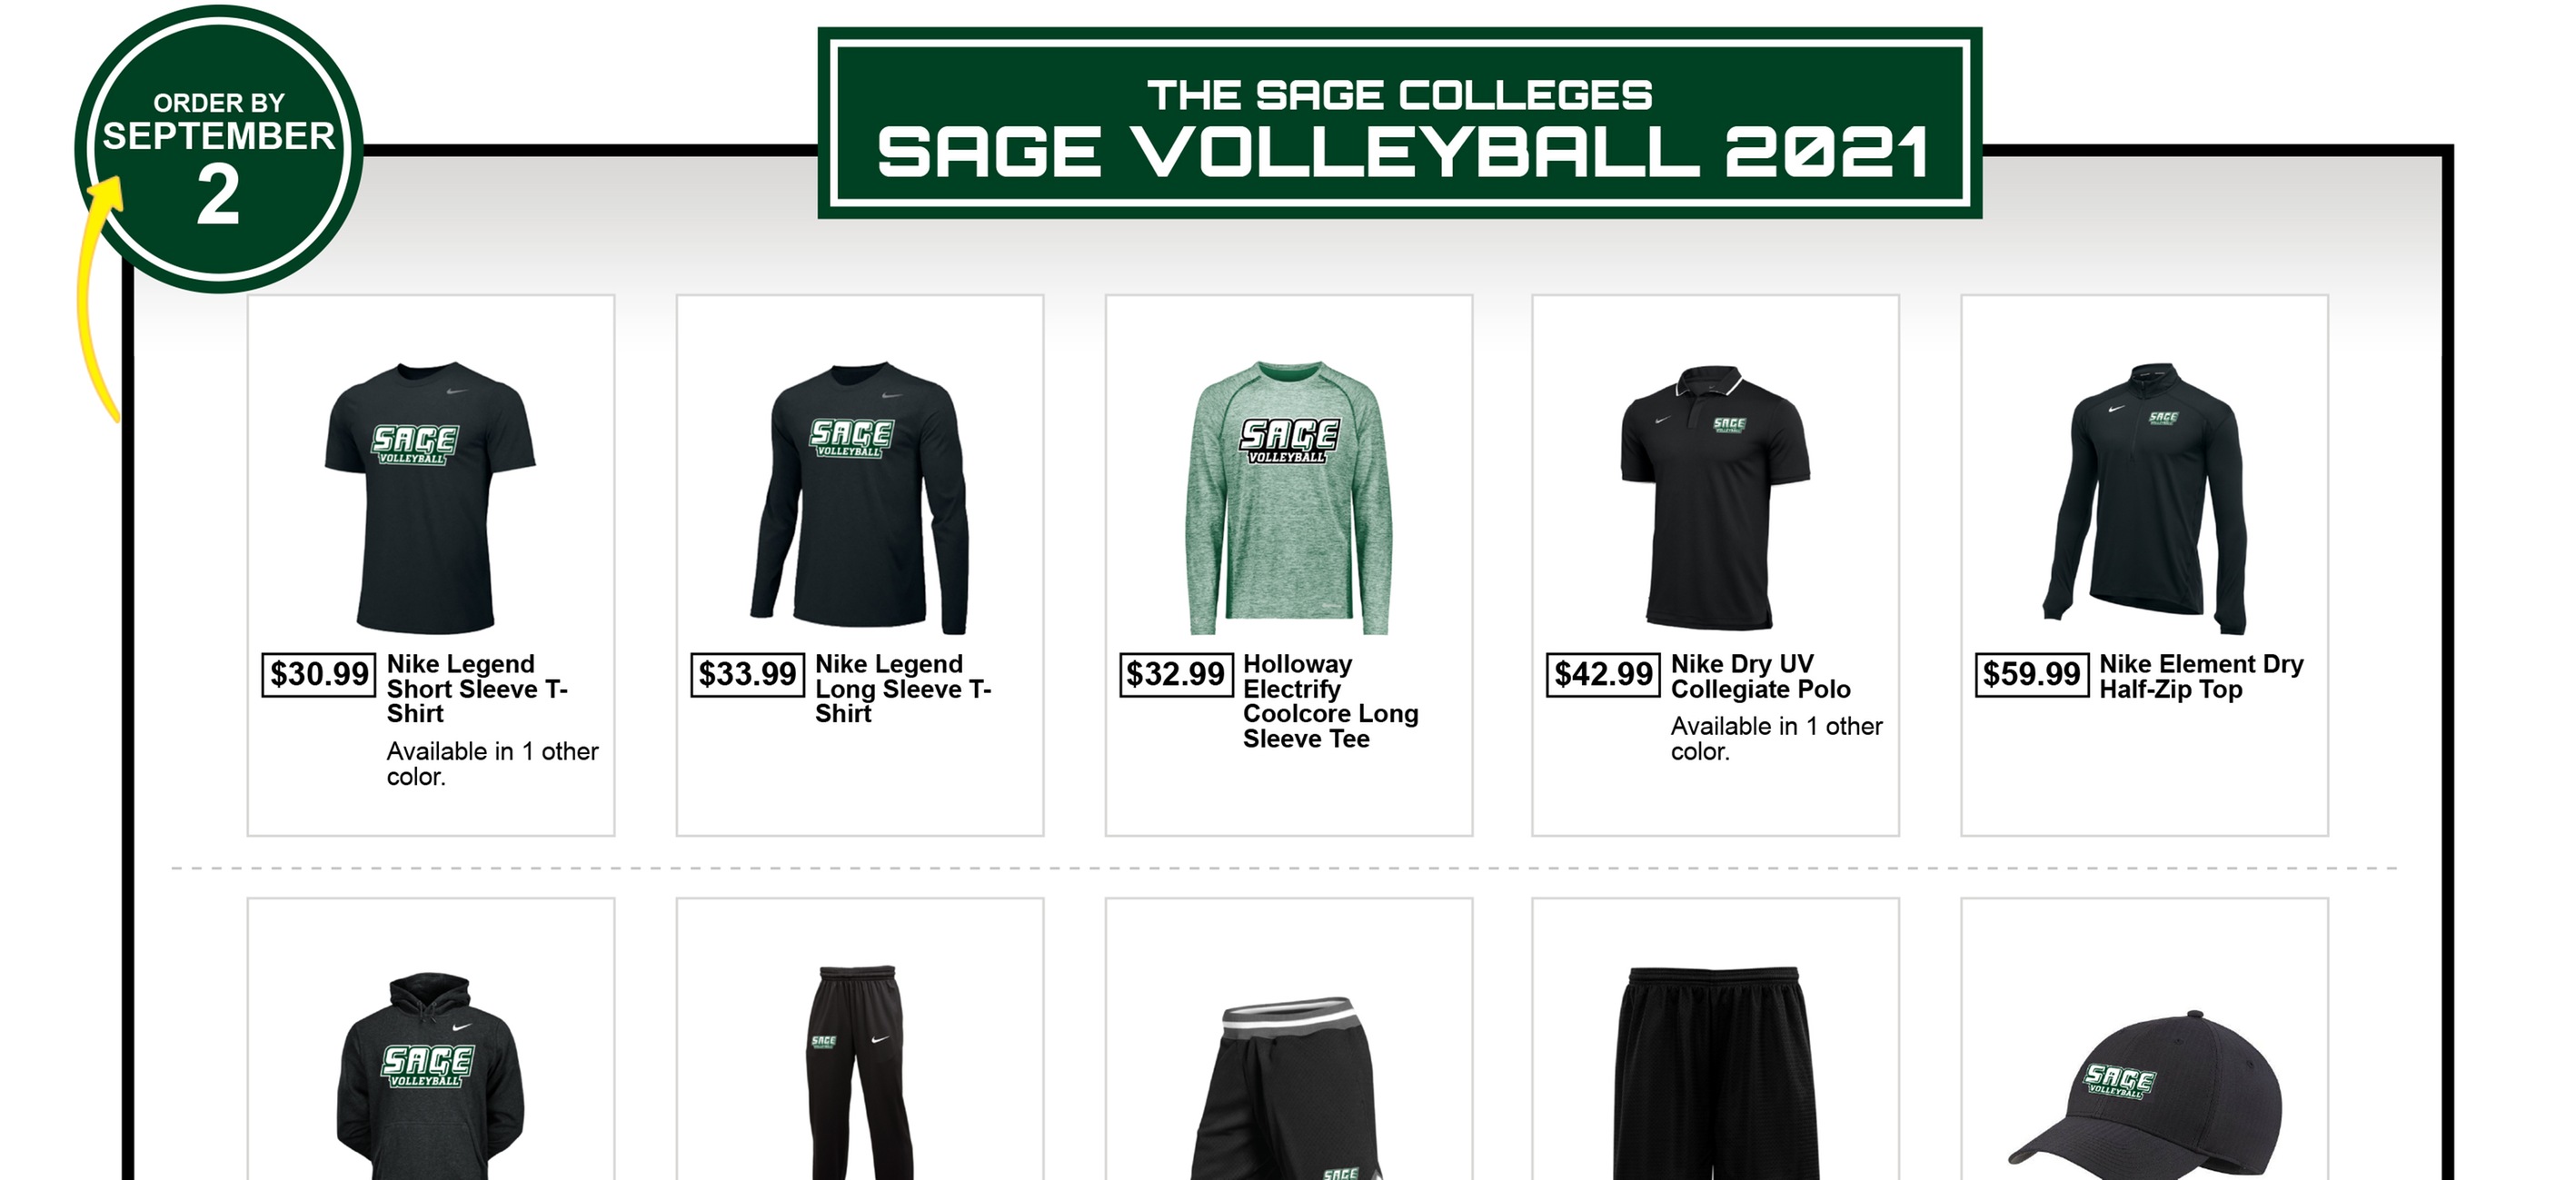 Dress Like a Gator and support RSC's Women's Volleyball Team